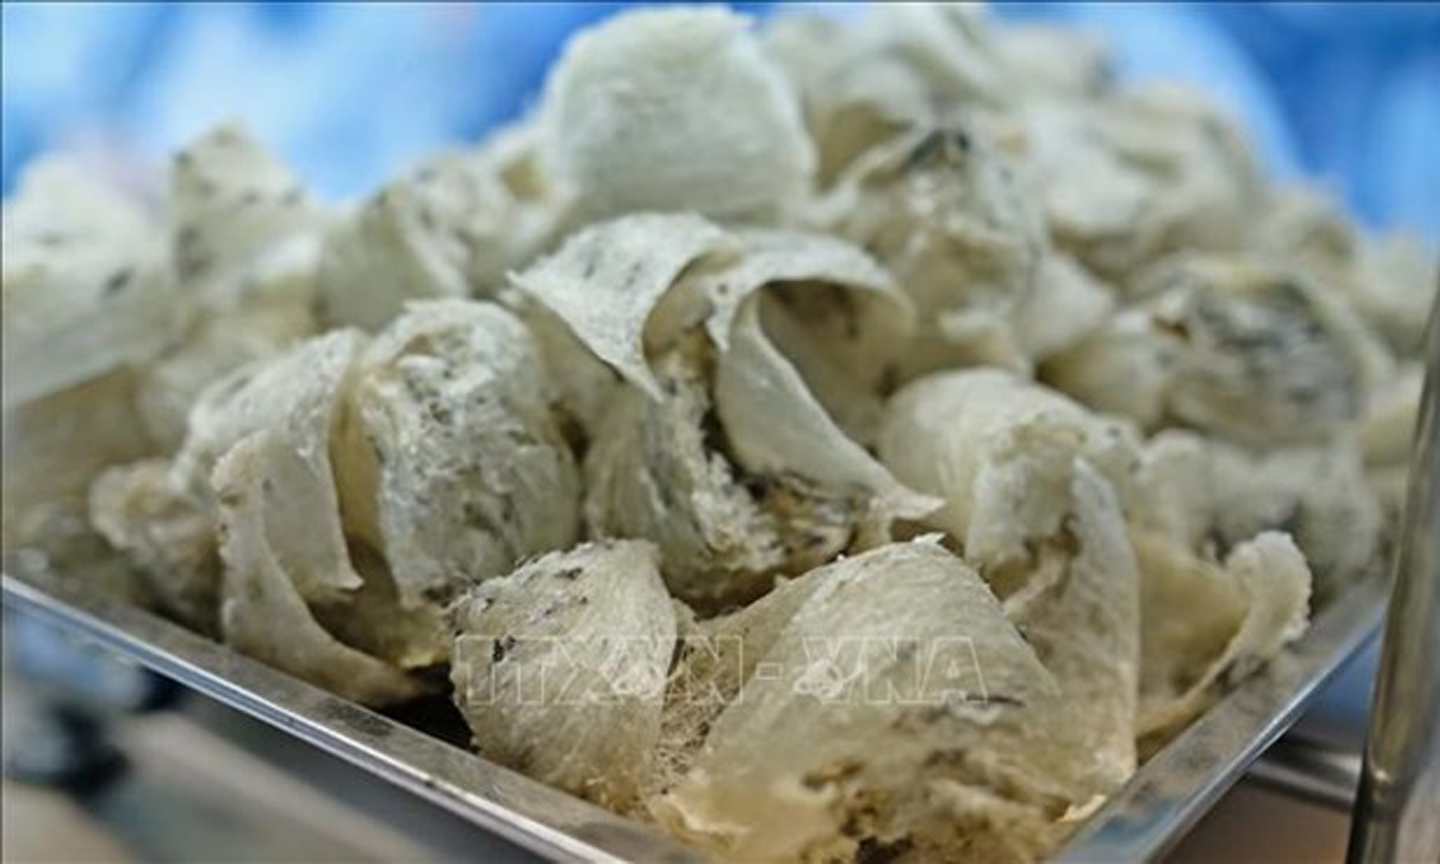 ABO/NDO- The General Administration of Customs of China (GACC) has officially allowed a Vietnamese enterprise to export bird’s nests to the country, the Ministry of Agriculture and Rural Development (MARD) has announced.